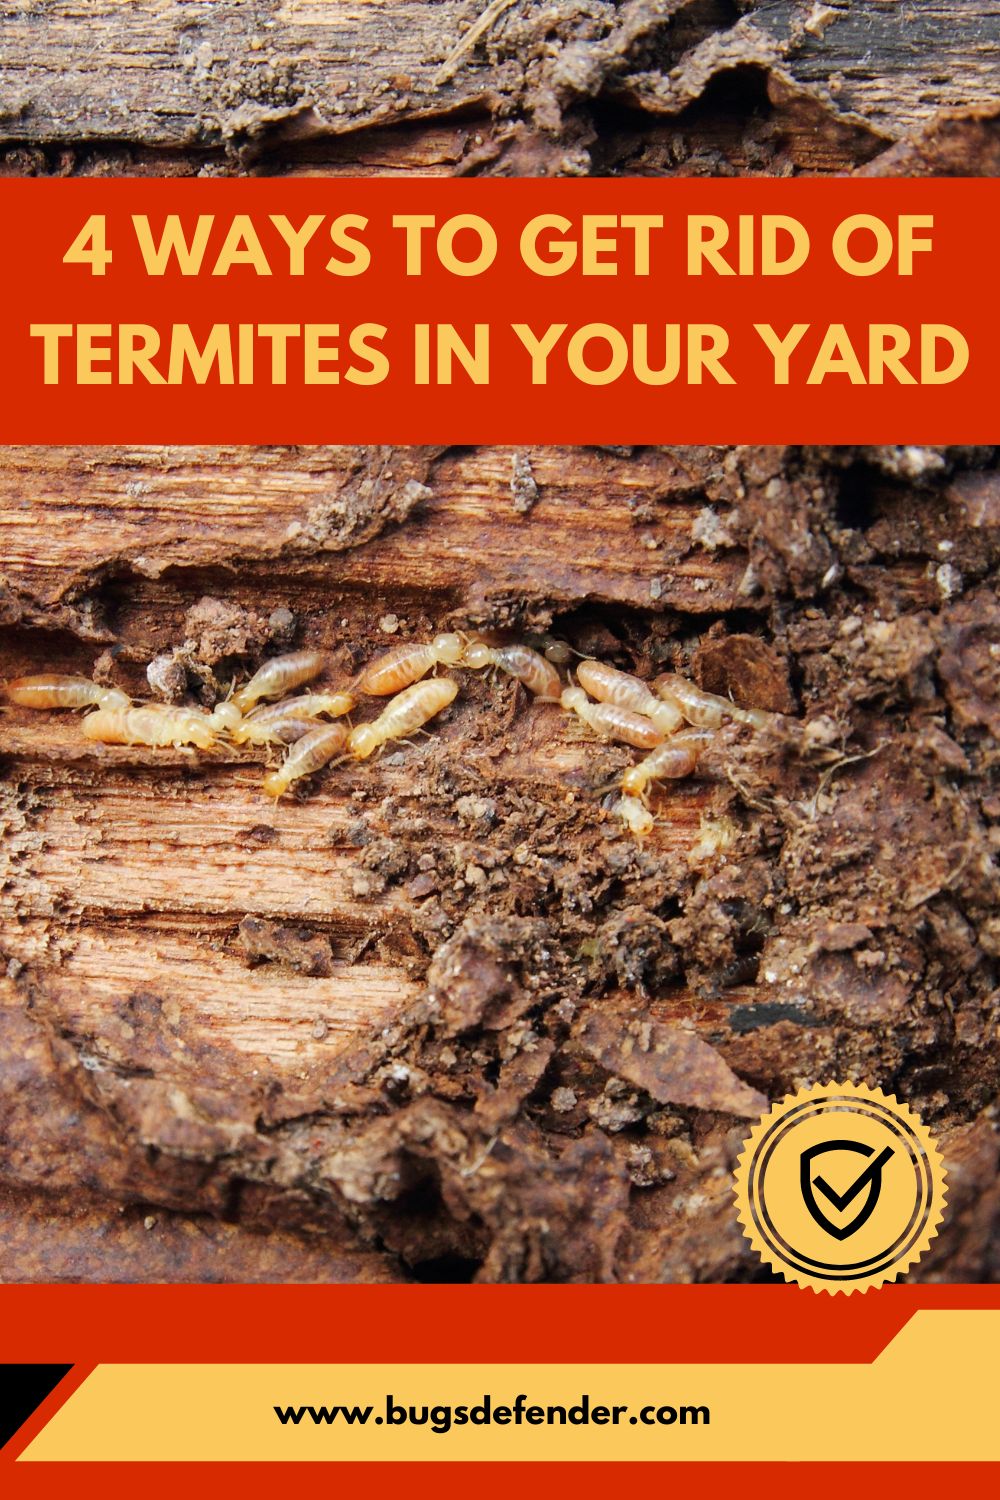 4 Ways to Get Rid of Termites in Your Yard pin3